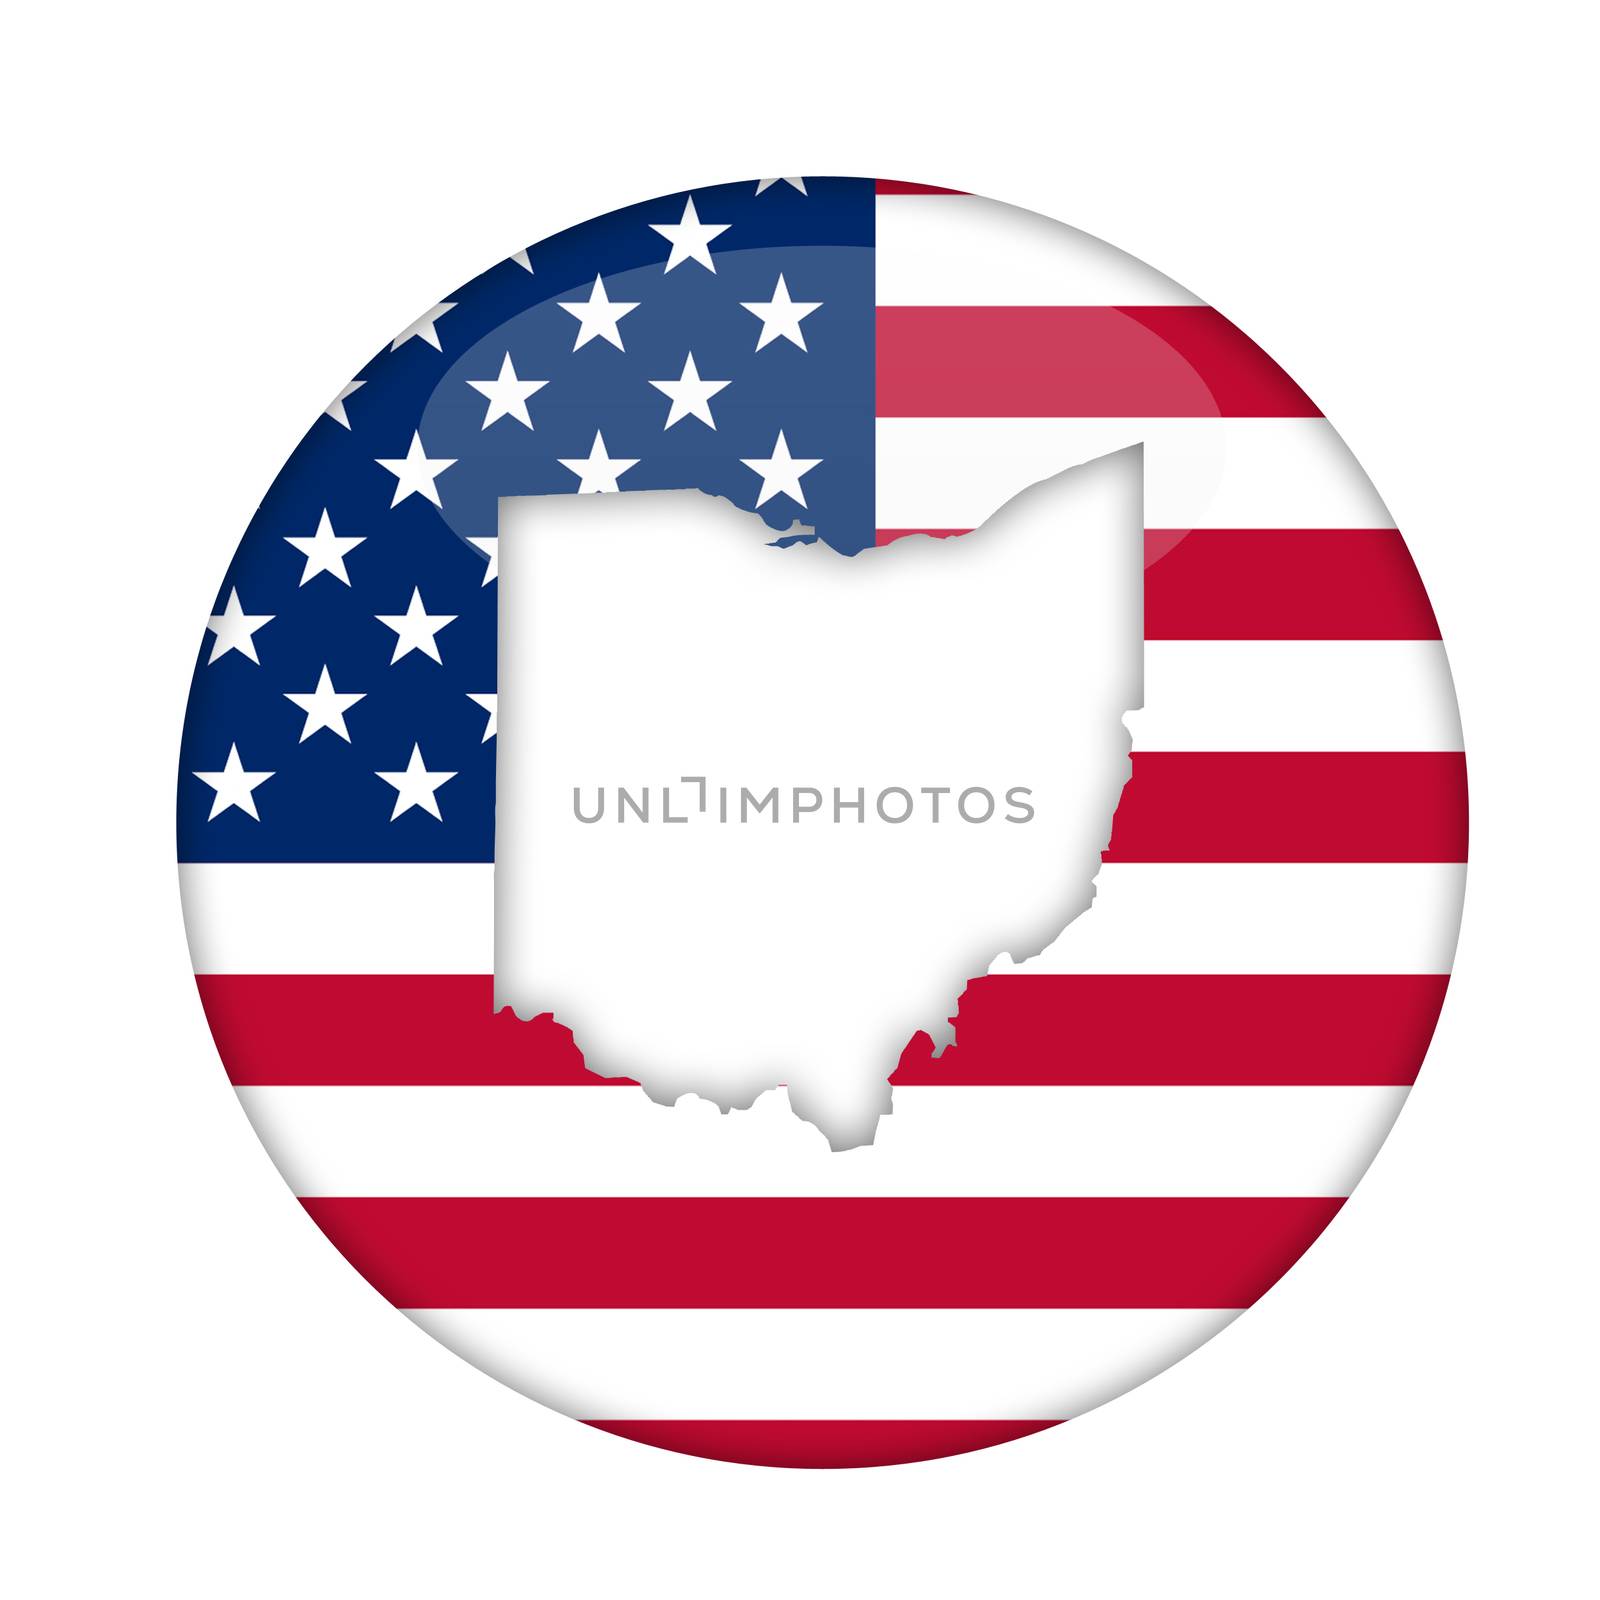 Ohio state of America badge isolated on a white background.